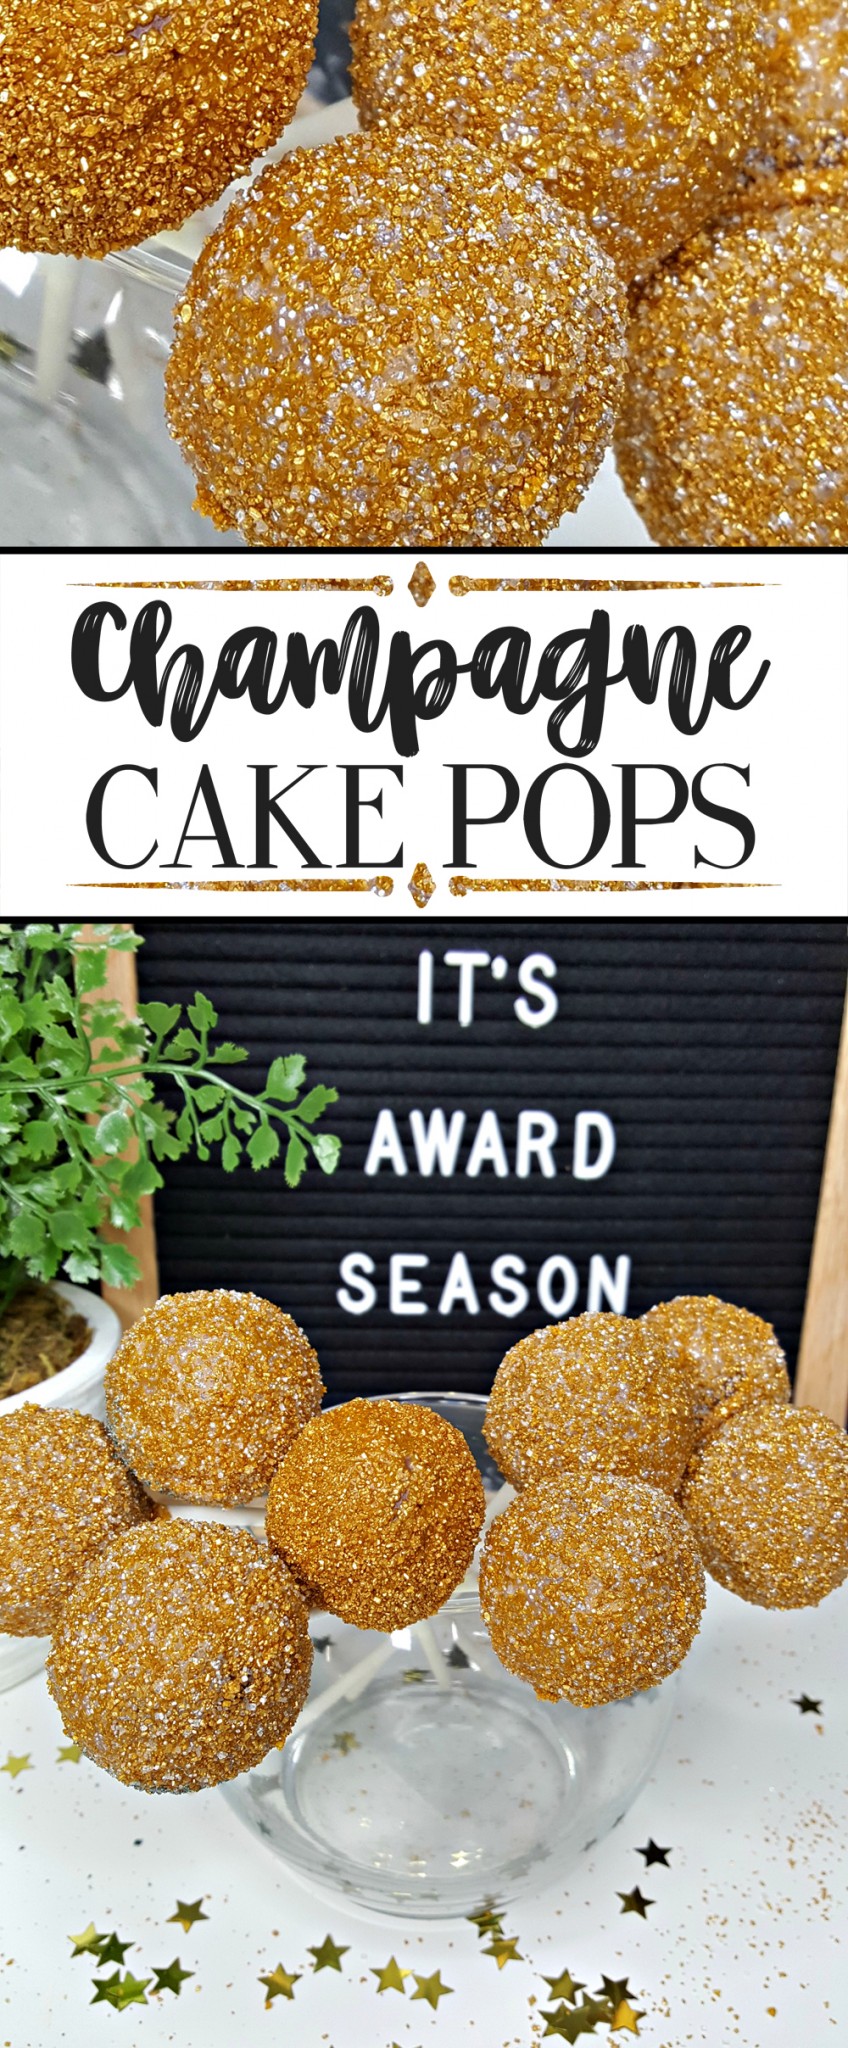 Recipe – Champagne Cake Pops For Weddings, Parties, Award Events!